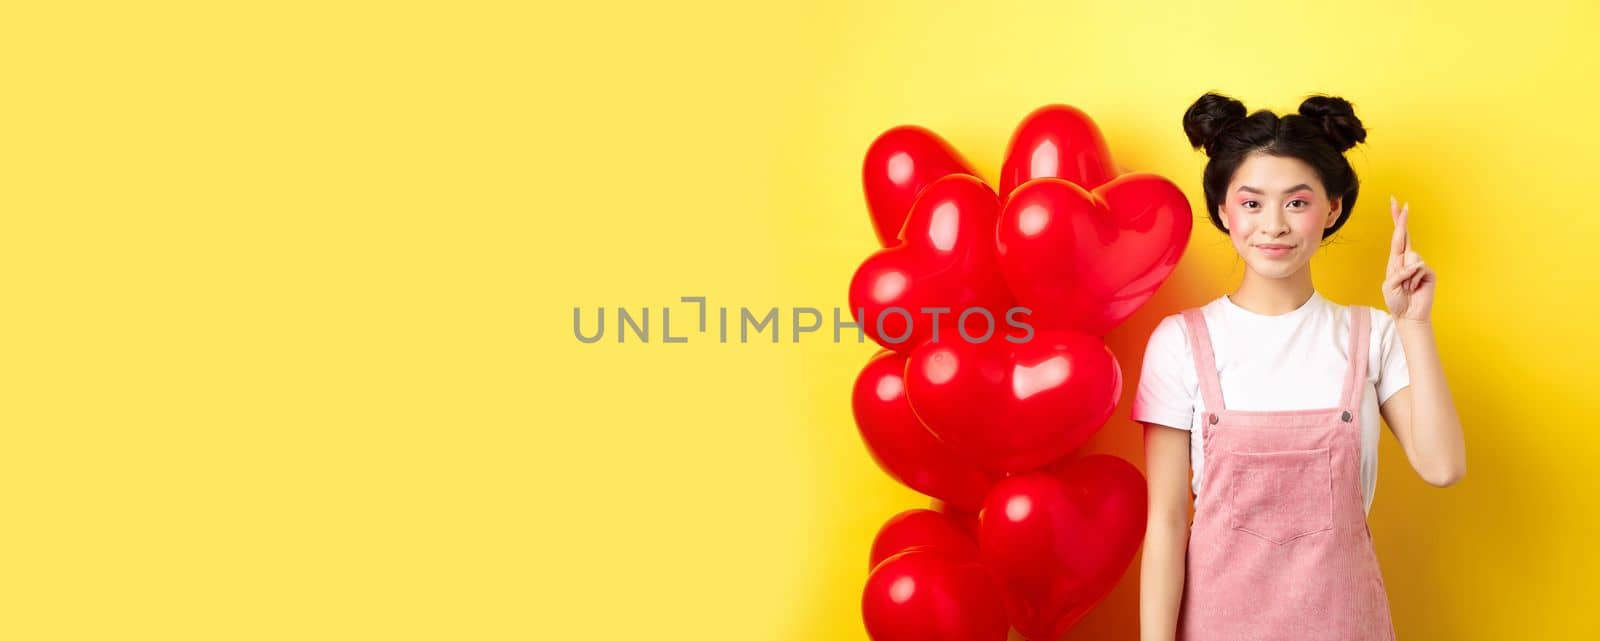 Valentines day concept. Stylish teenage asian girl with romantic make-up look, holding fingers crossed for good luck, making wish and smiling, standing on yellow background.